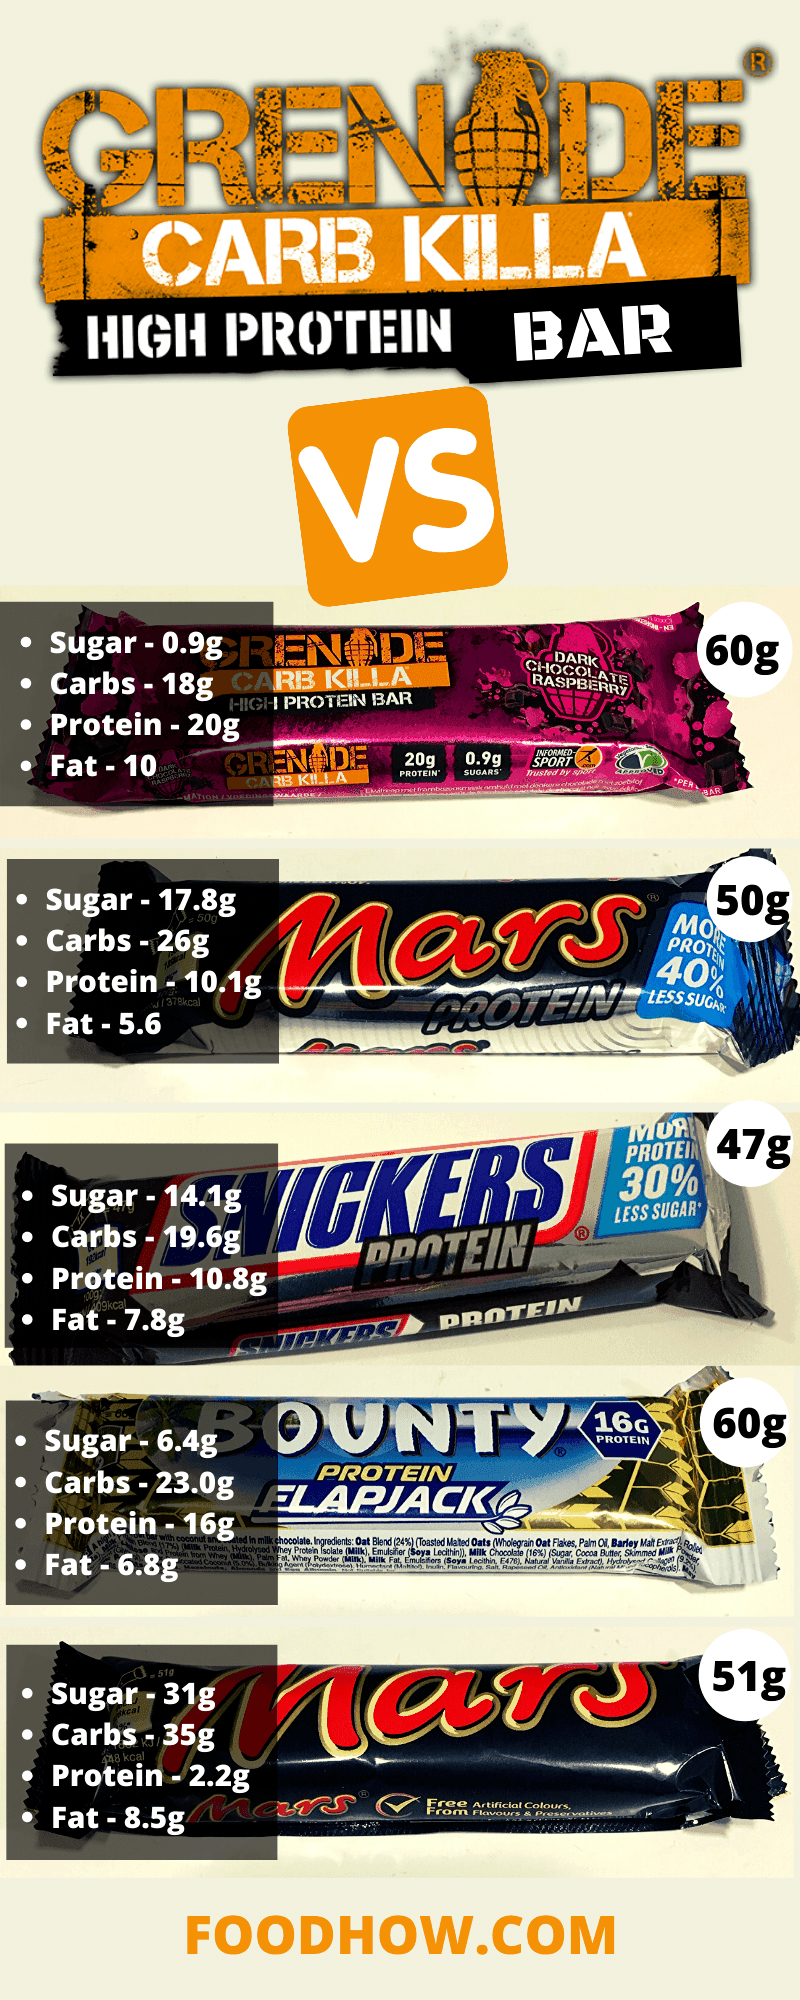 Grenade Carb Killa compared to other protein bars